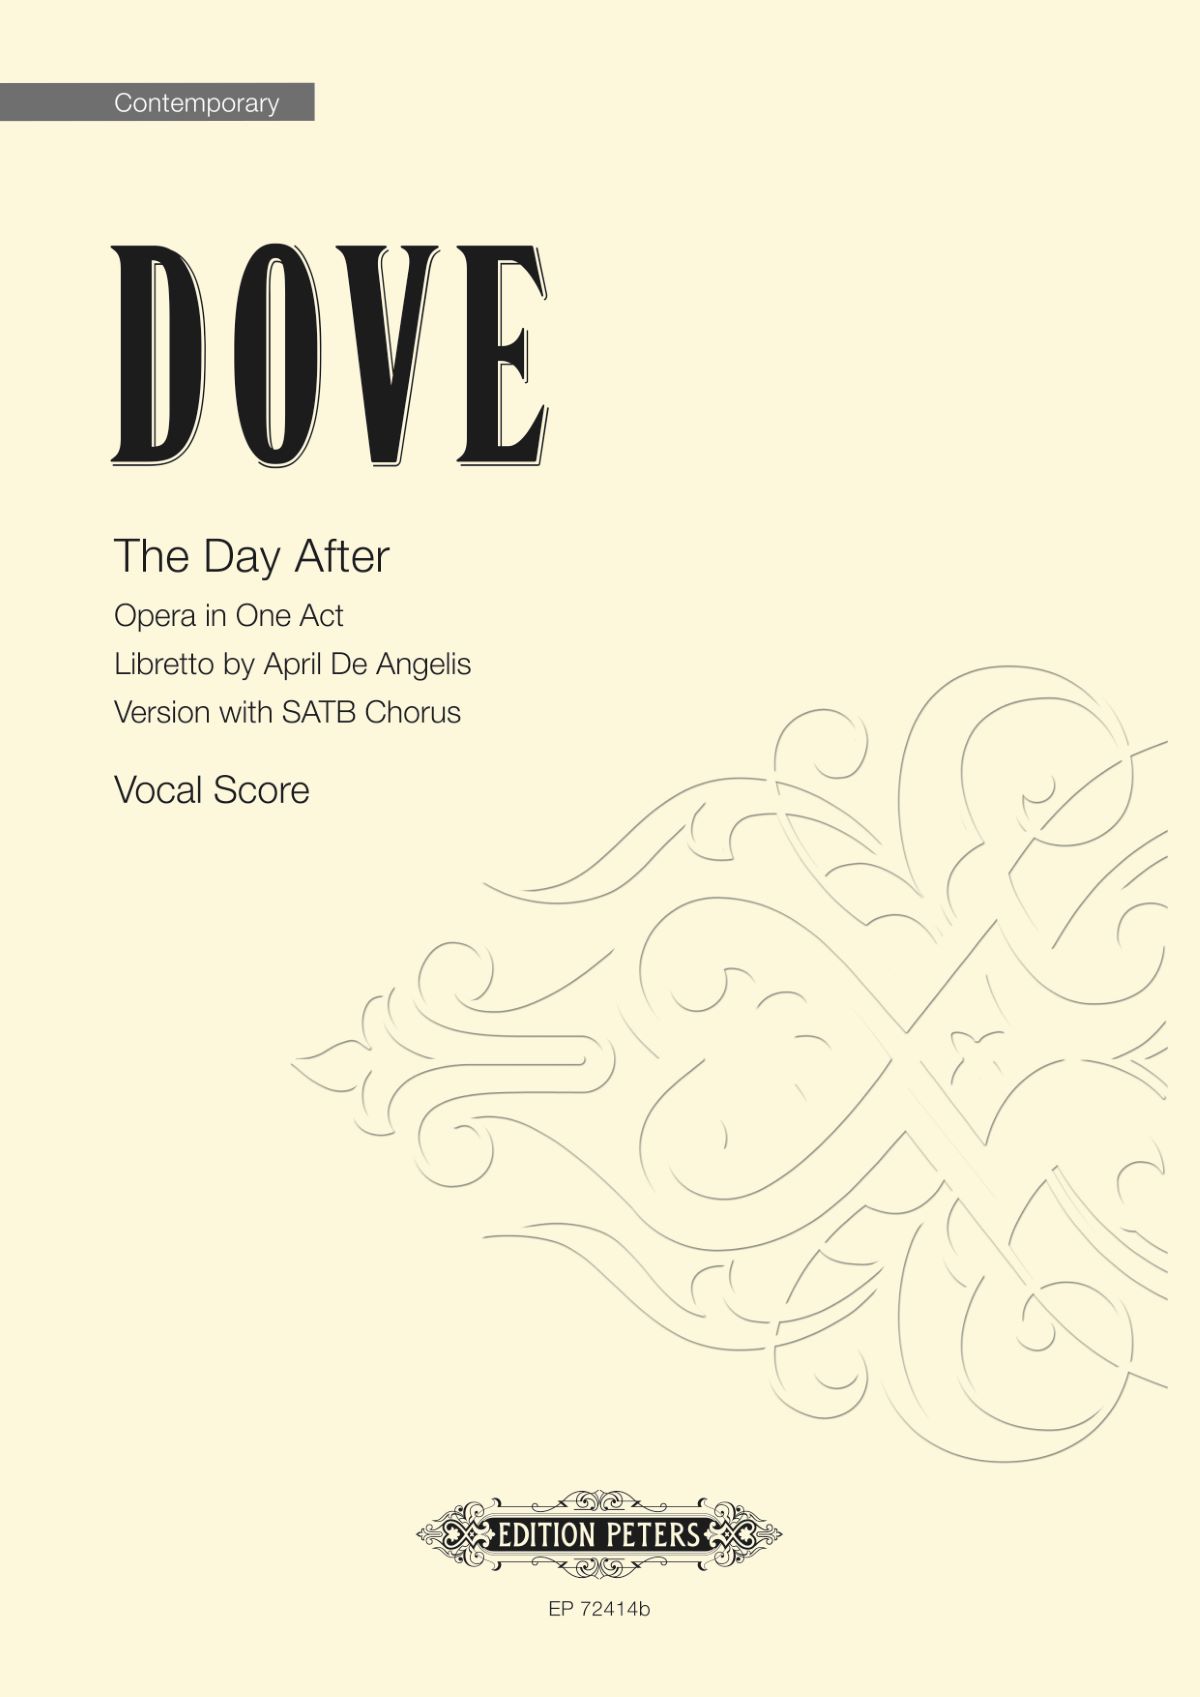 The Day After (DOVE JONATHAN)